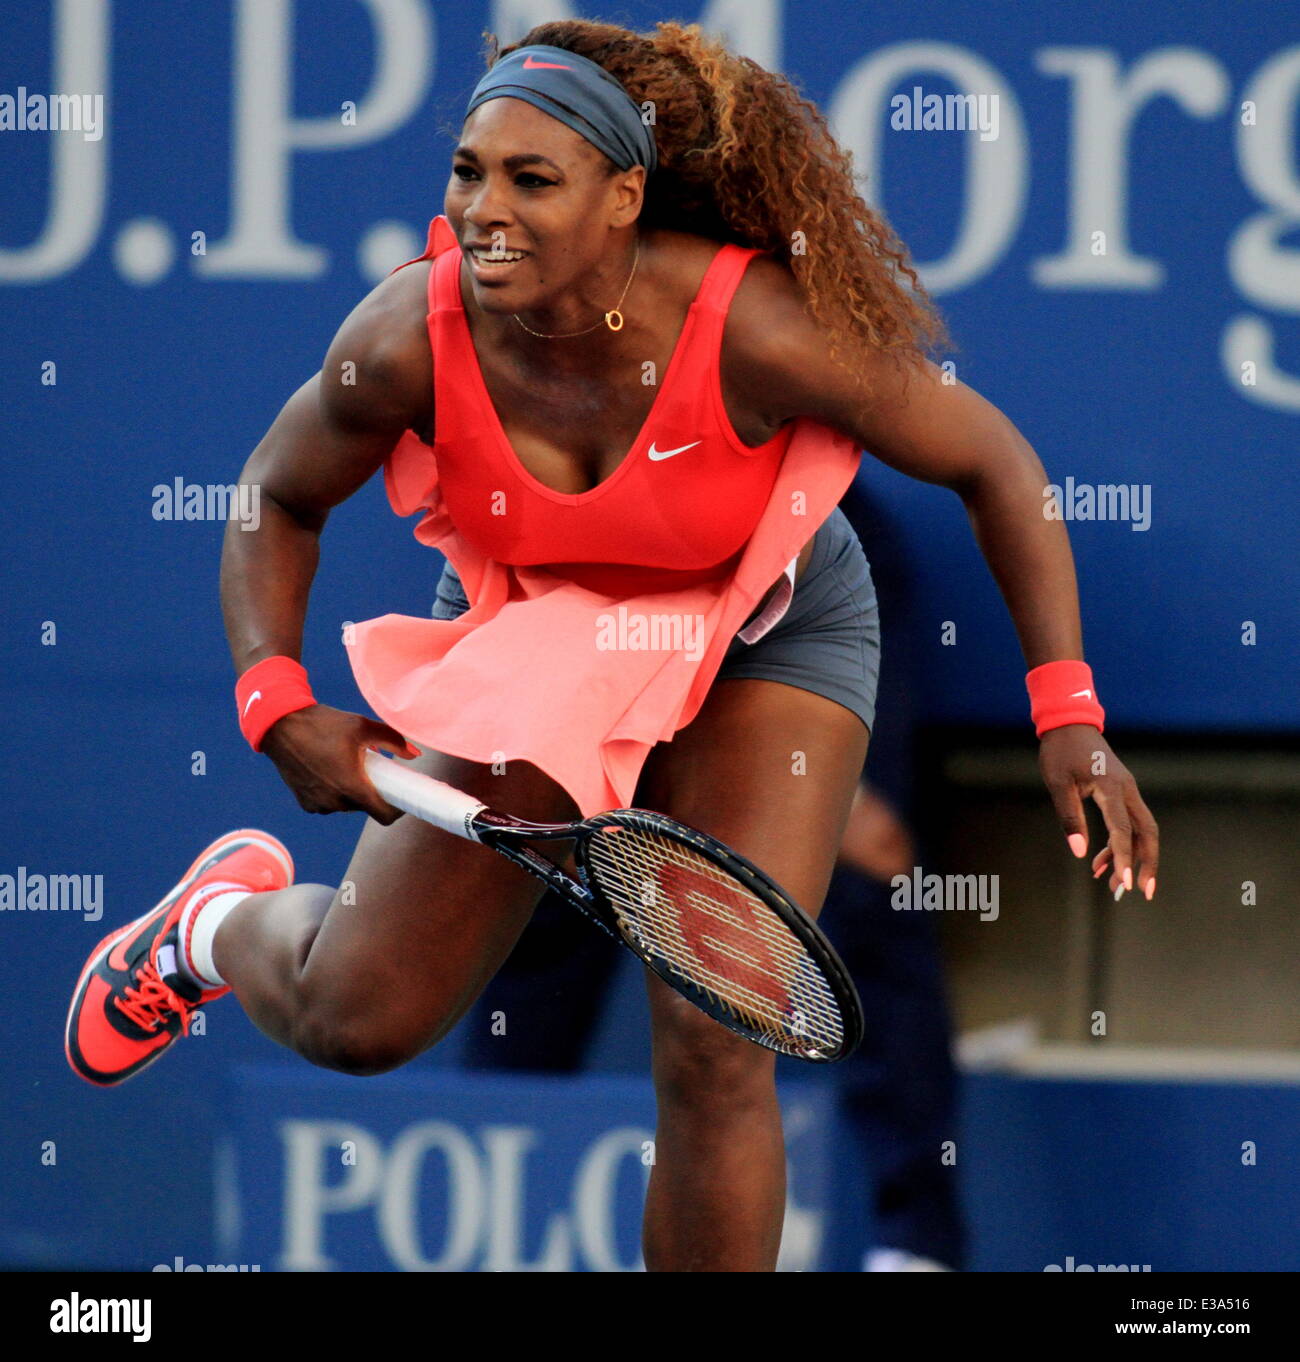 Serena Williams, Na Li, and Victoria Azarenka all in live tennis action at the 2013 US Open Featuring Serena Williams Where New York City, NY, United States When 06 Sep 2013 Stock Photo